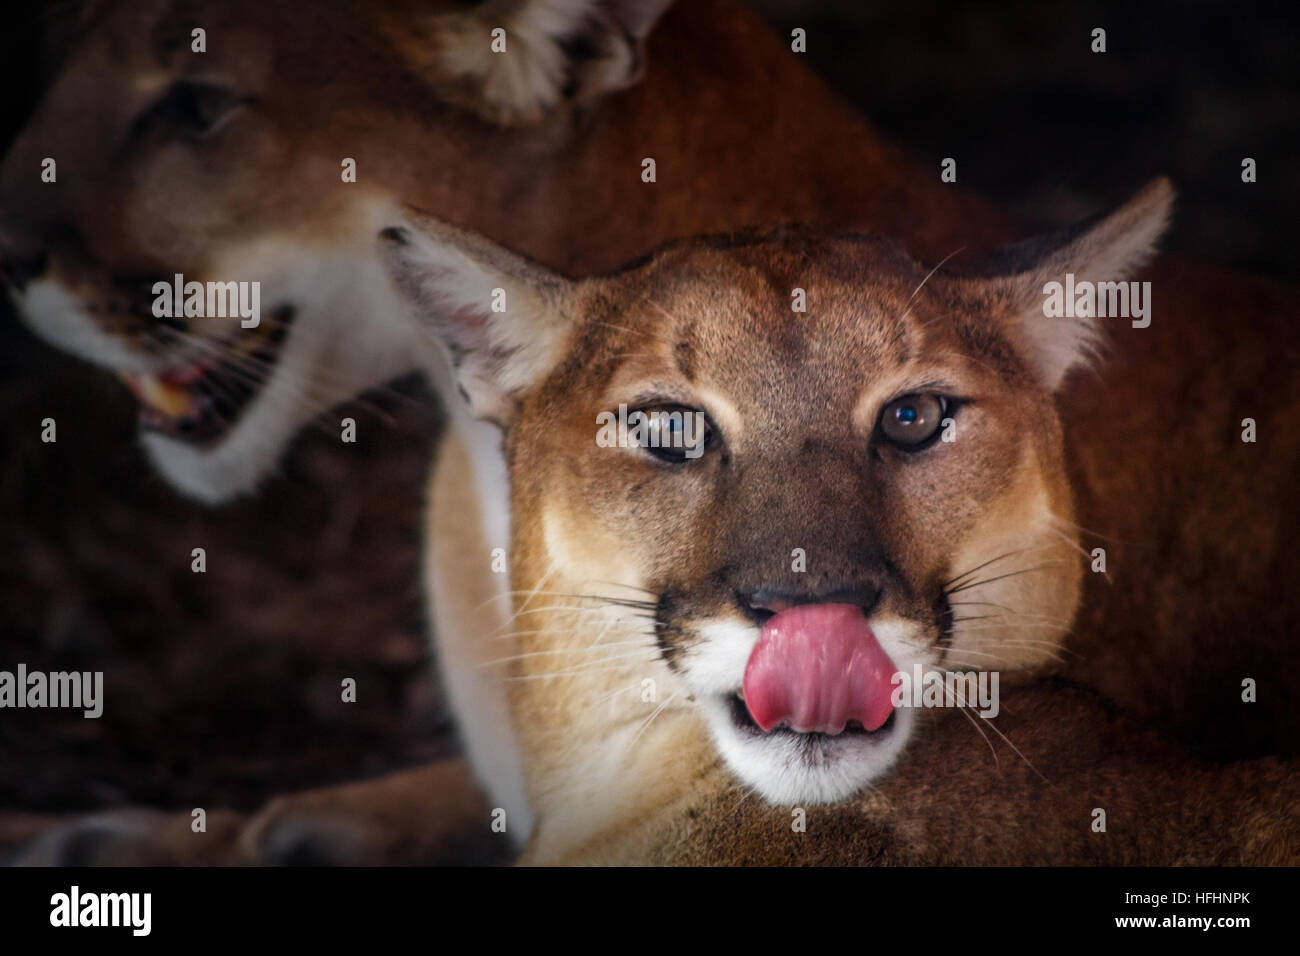 What camera is needed to take good photographs of cougars?